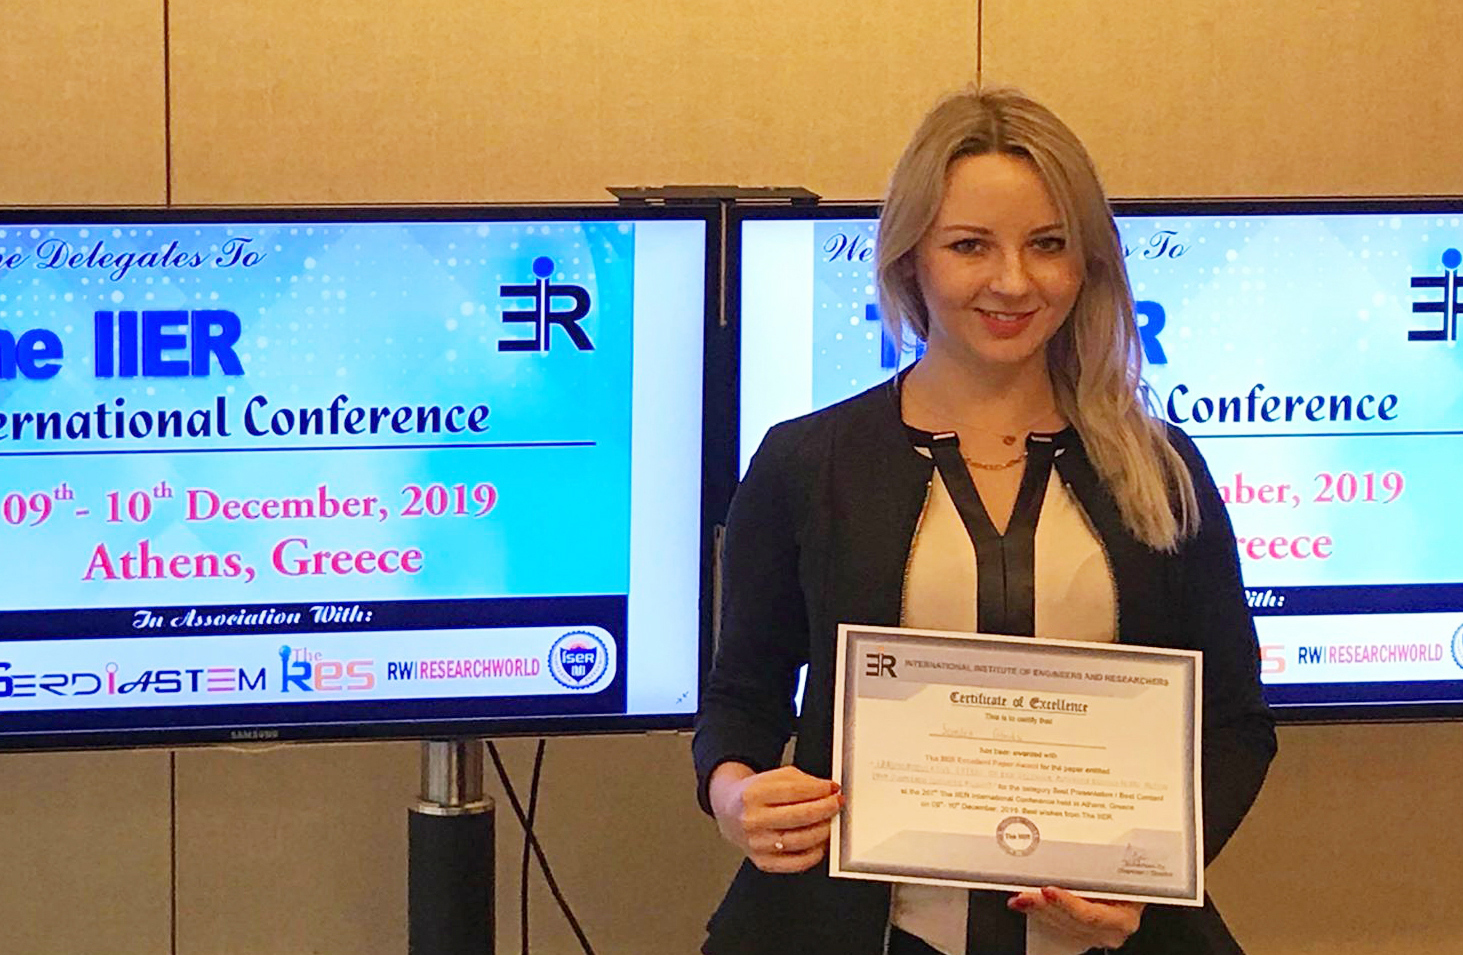 MUW Doctoral Student Awarded at the 2019 IIER 767th International Conference on Natural Science and Environment 